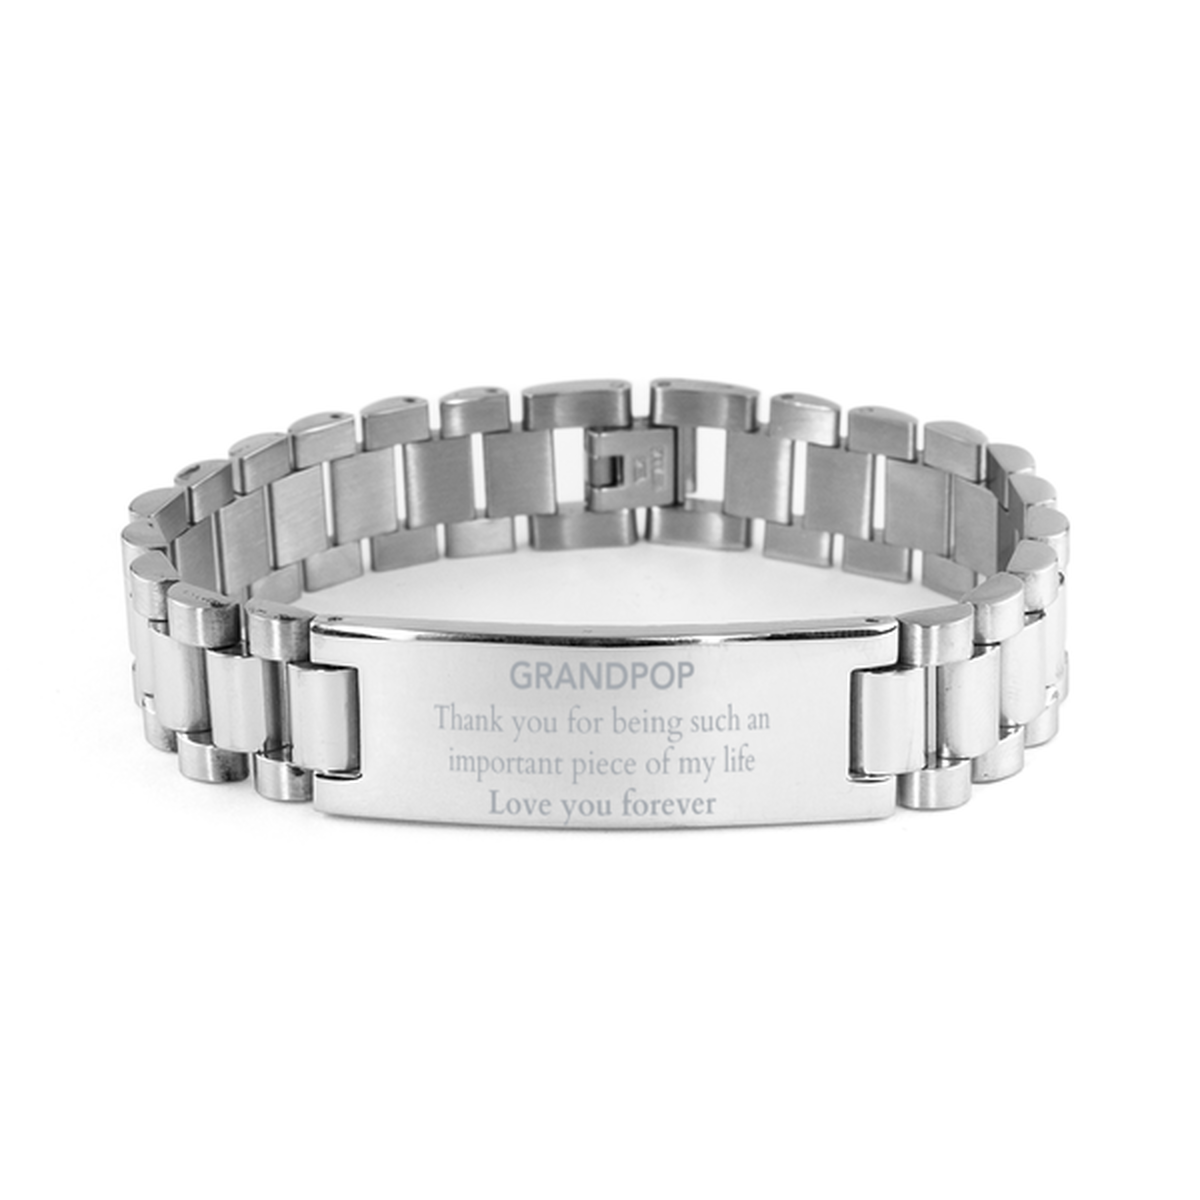 Appropriate Grandpop Ladder Stainless Steel Bracelet Epic Birthday Gifts for Grandpop Thank you for being such an important piece of my life Grandpop Christmas Mothers Fathers Day